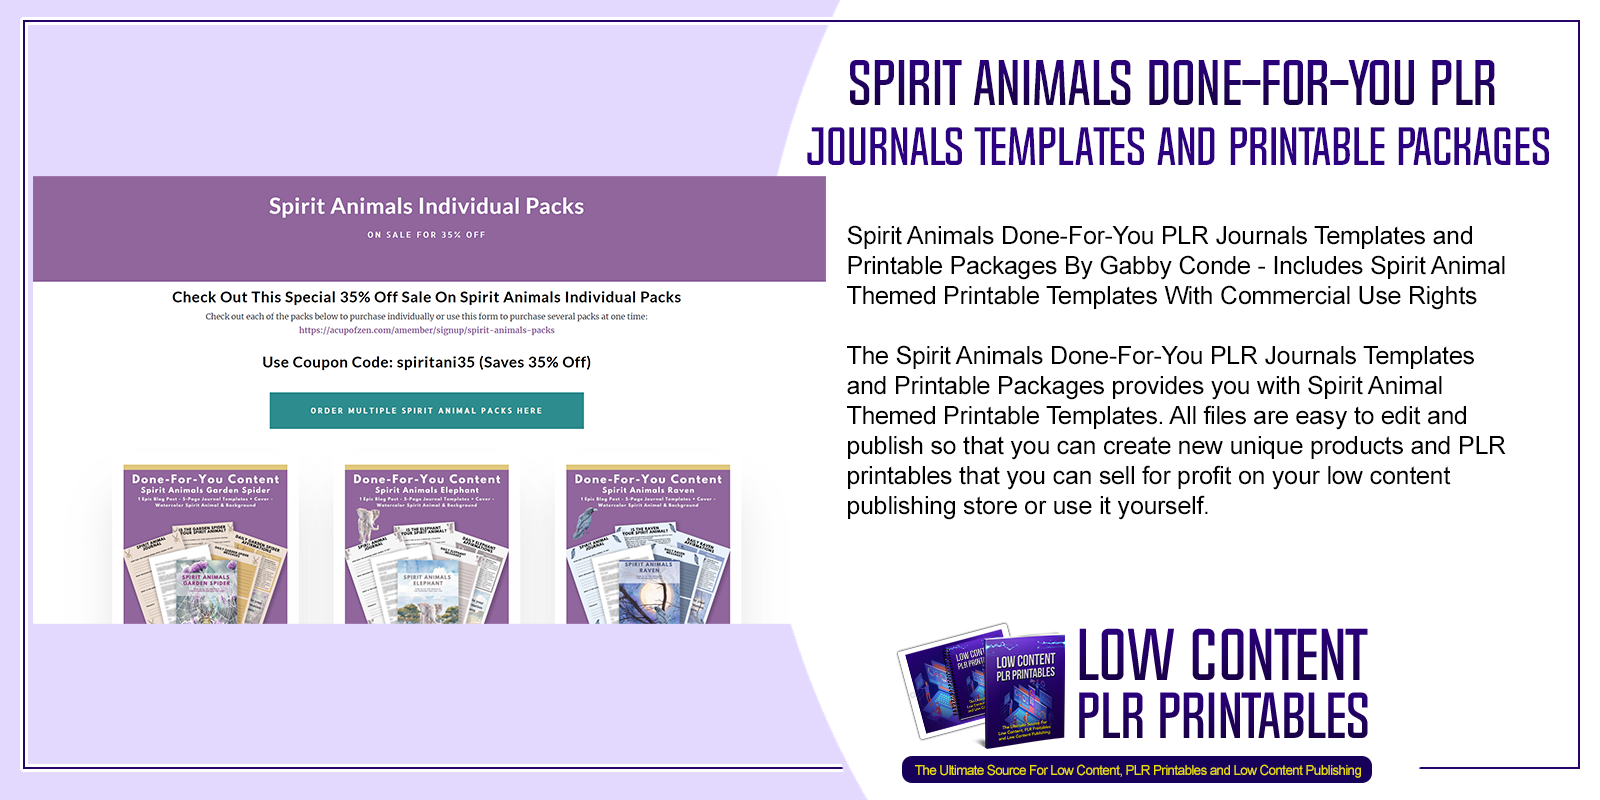 Spirit Animals Done For You PLR Journals Templates and Printable Packages